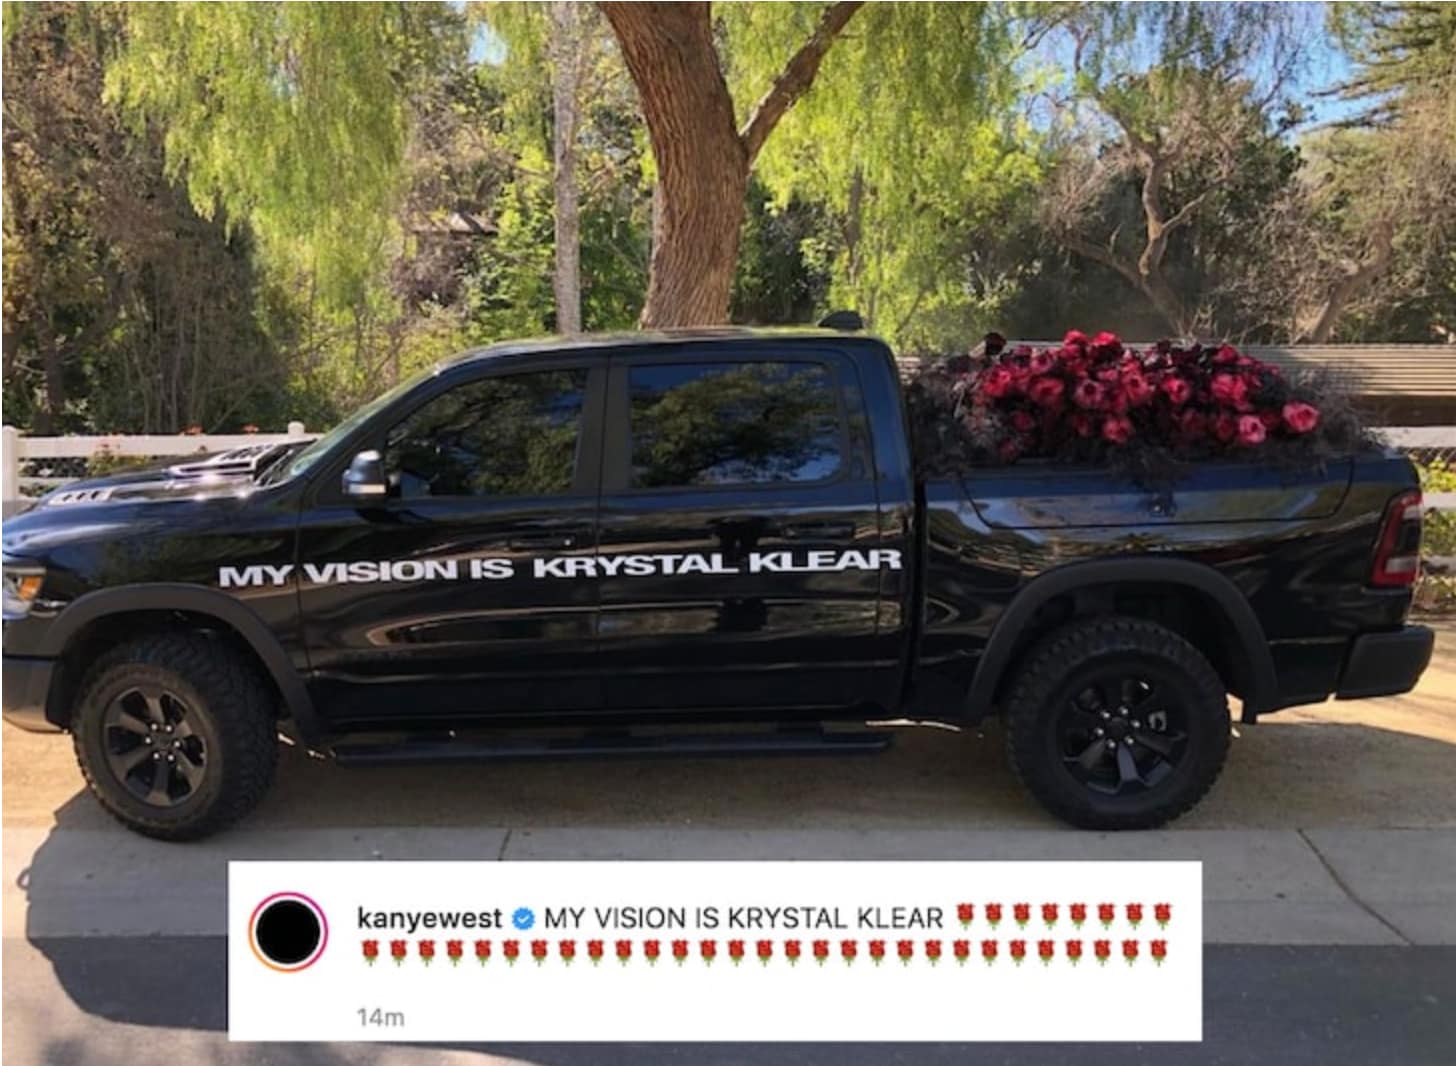 Kanye sent a bunch of flowers to Kim.